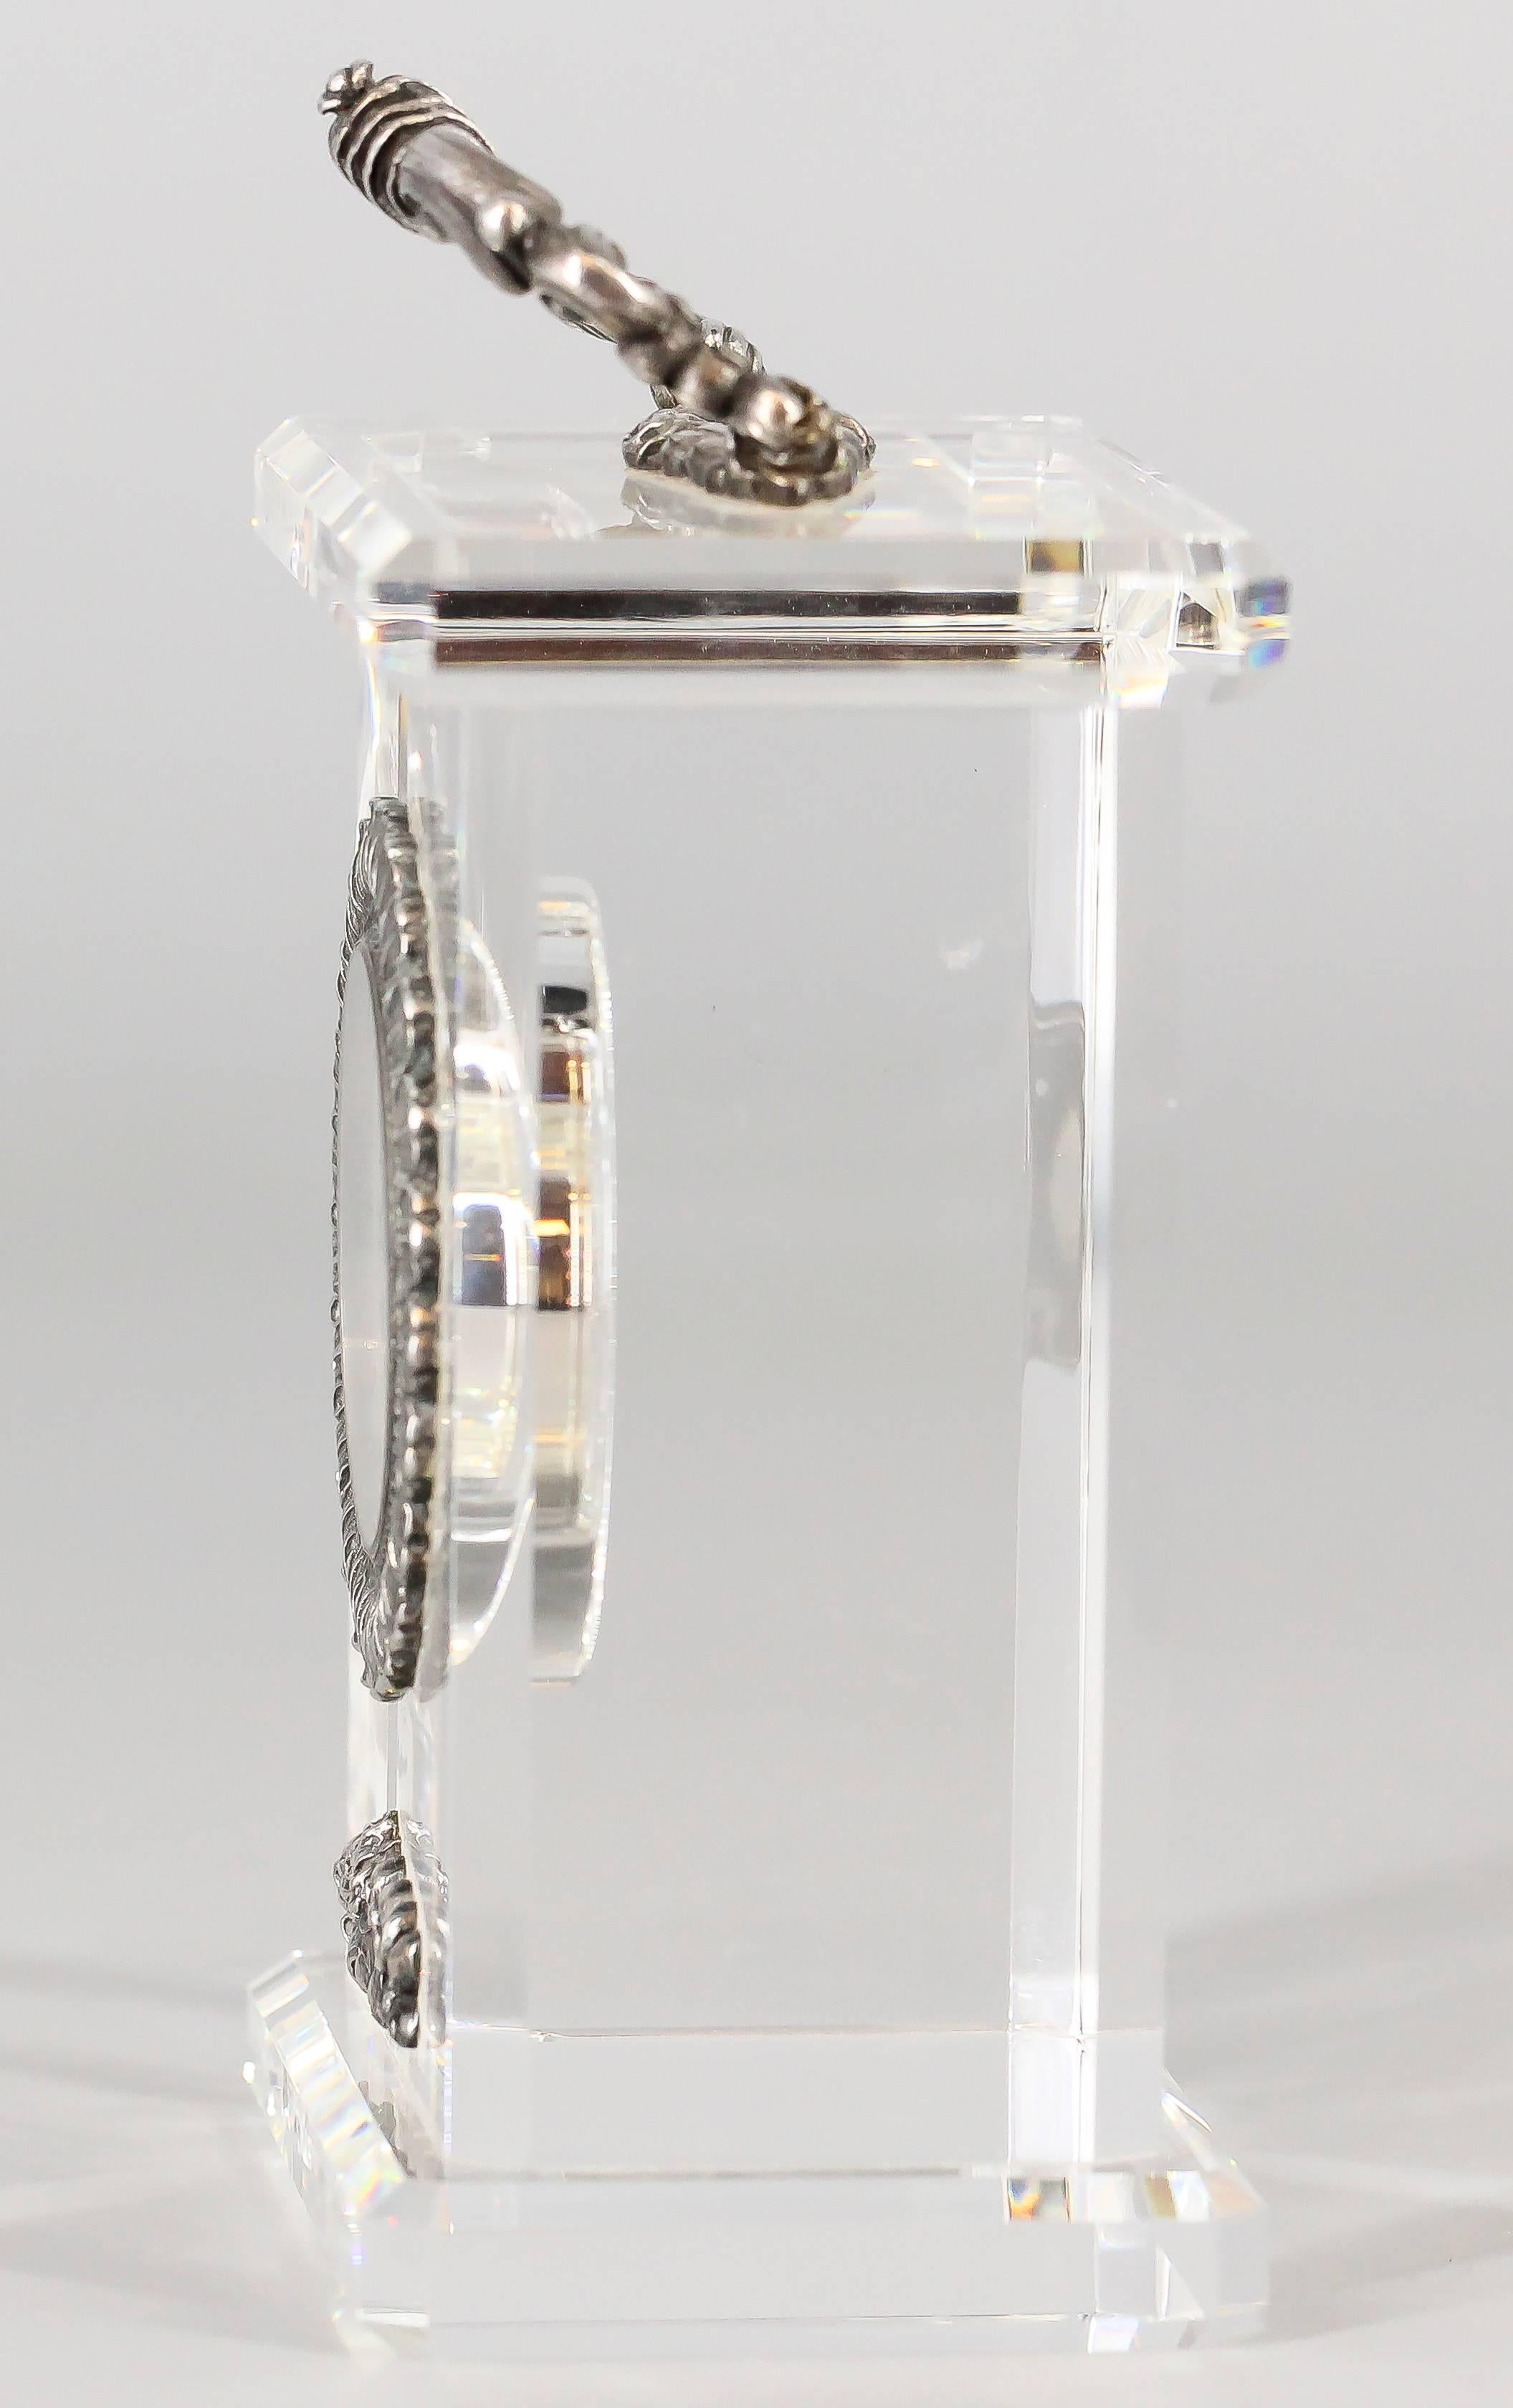 Fine sterling silver and rock crystal limited edition desk clock by Buccellati. It features a beautiful design comprised of clear rock crystal with sterling silver handle bar and accents, as well as the bezel on the clock.  The clock features a